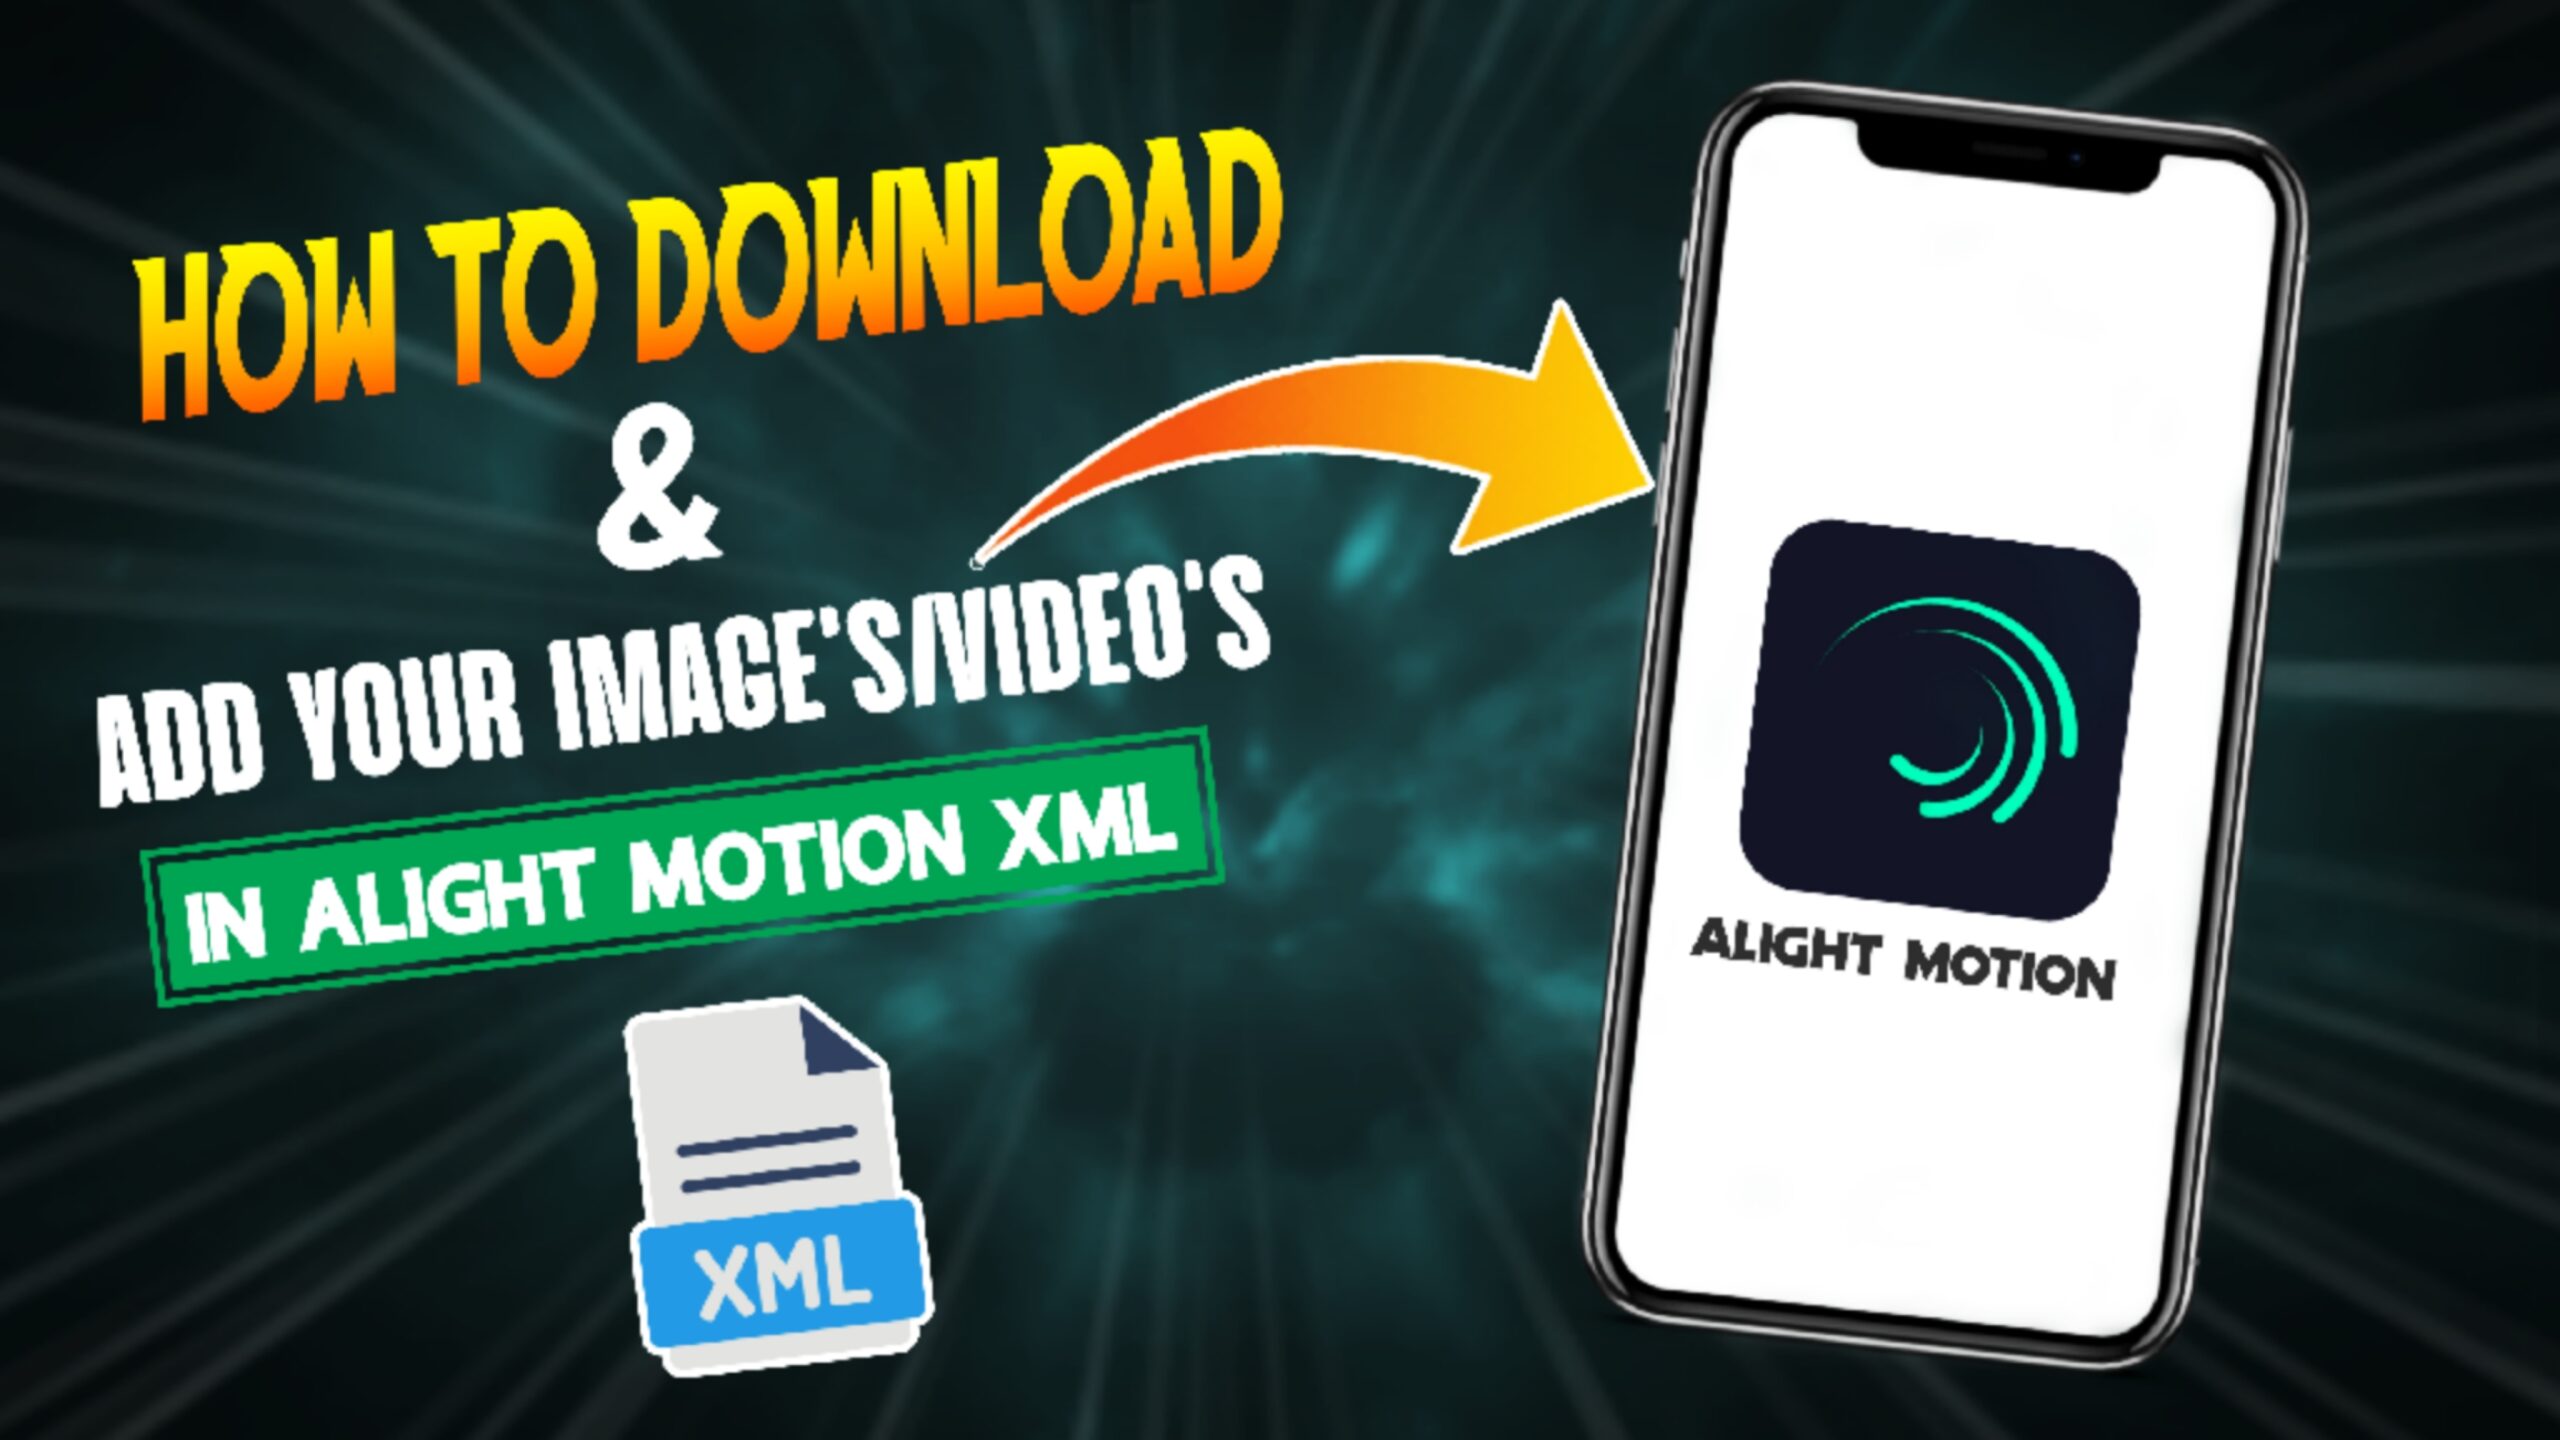 How to Import XML file in Alight Motion